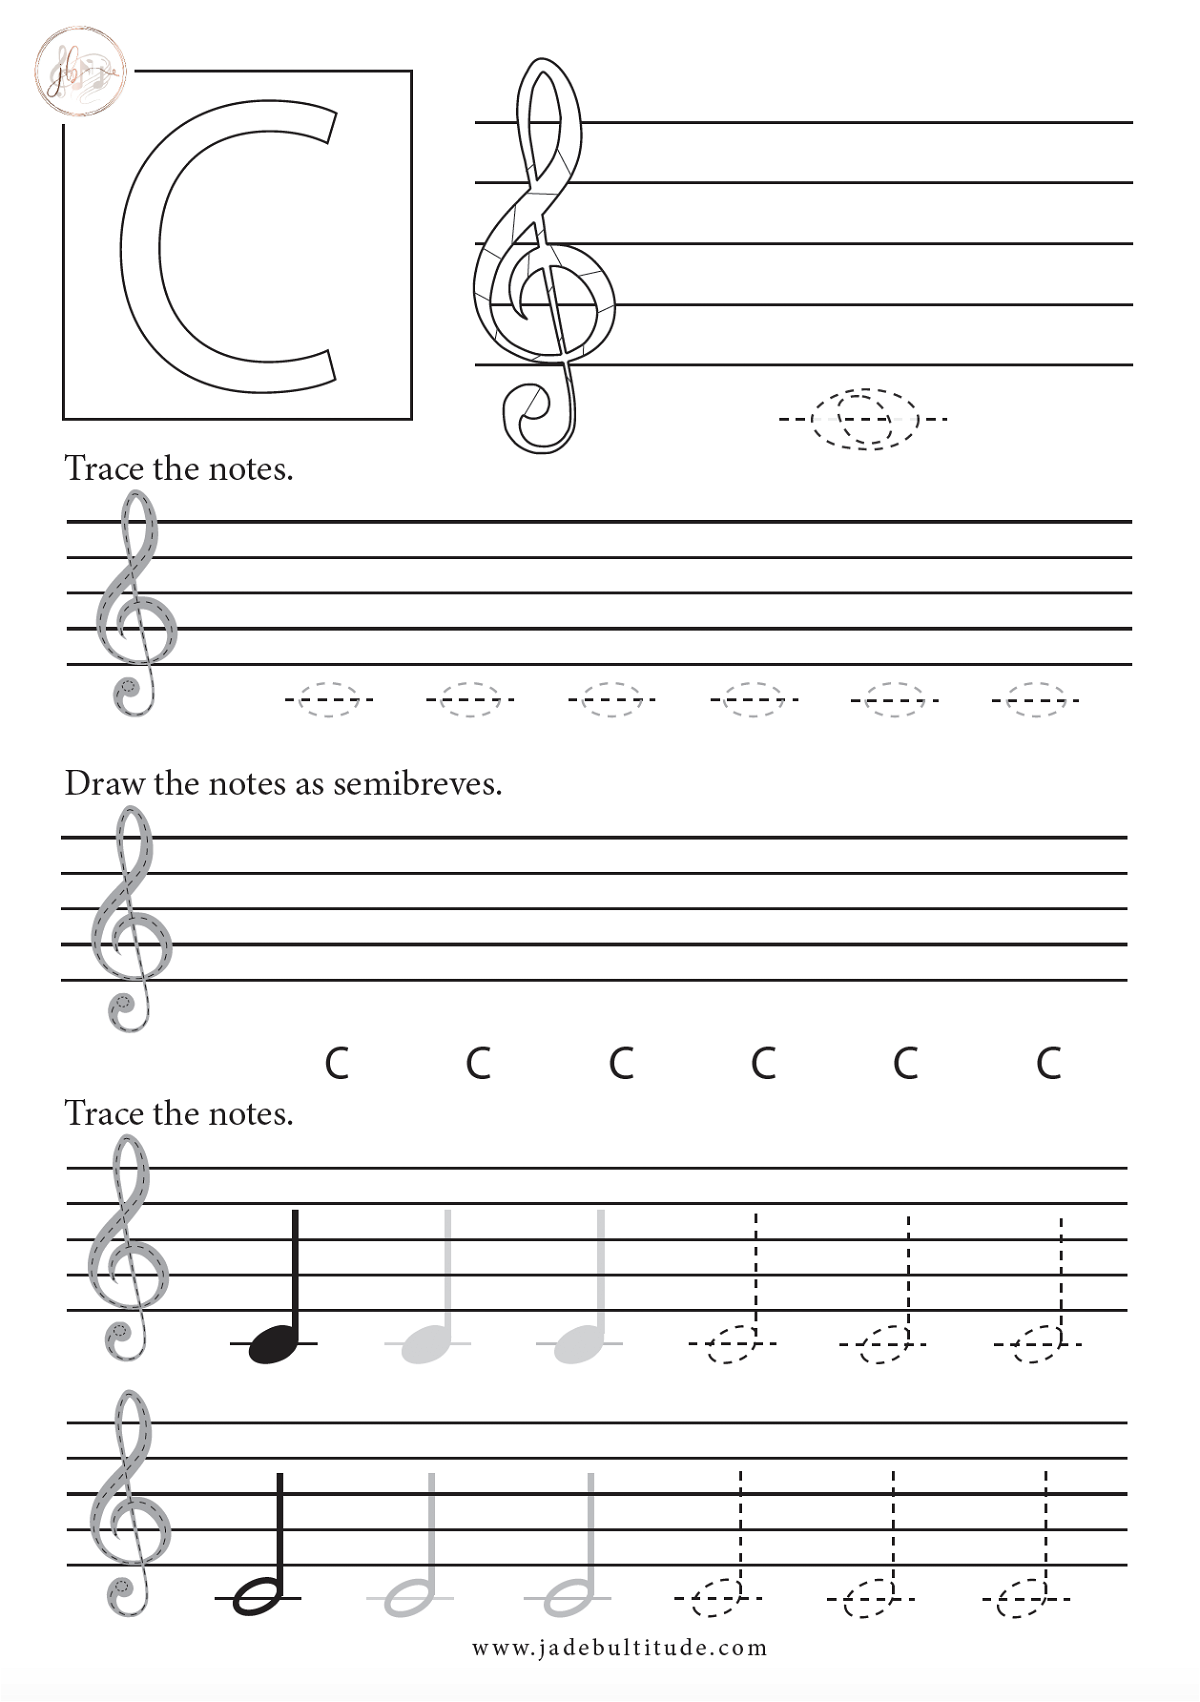 How to Draw your Notes in the Treble Clef Jade Bultitude